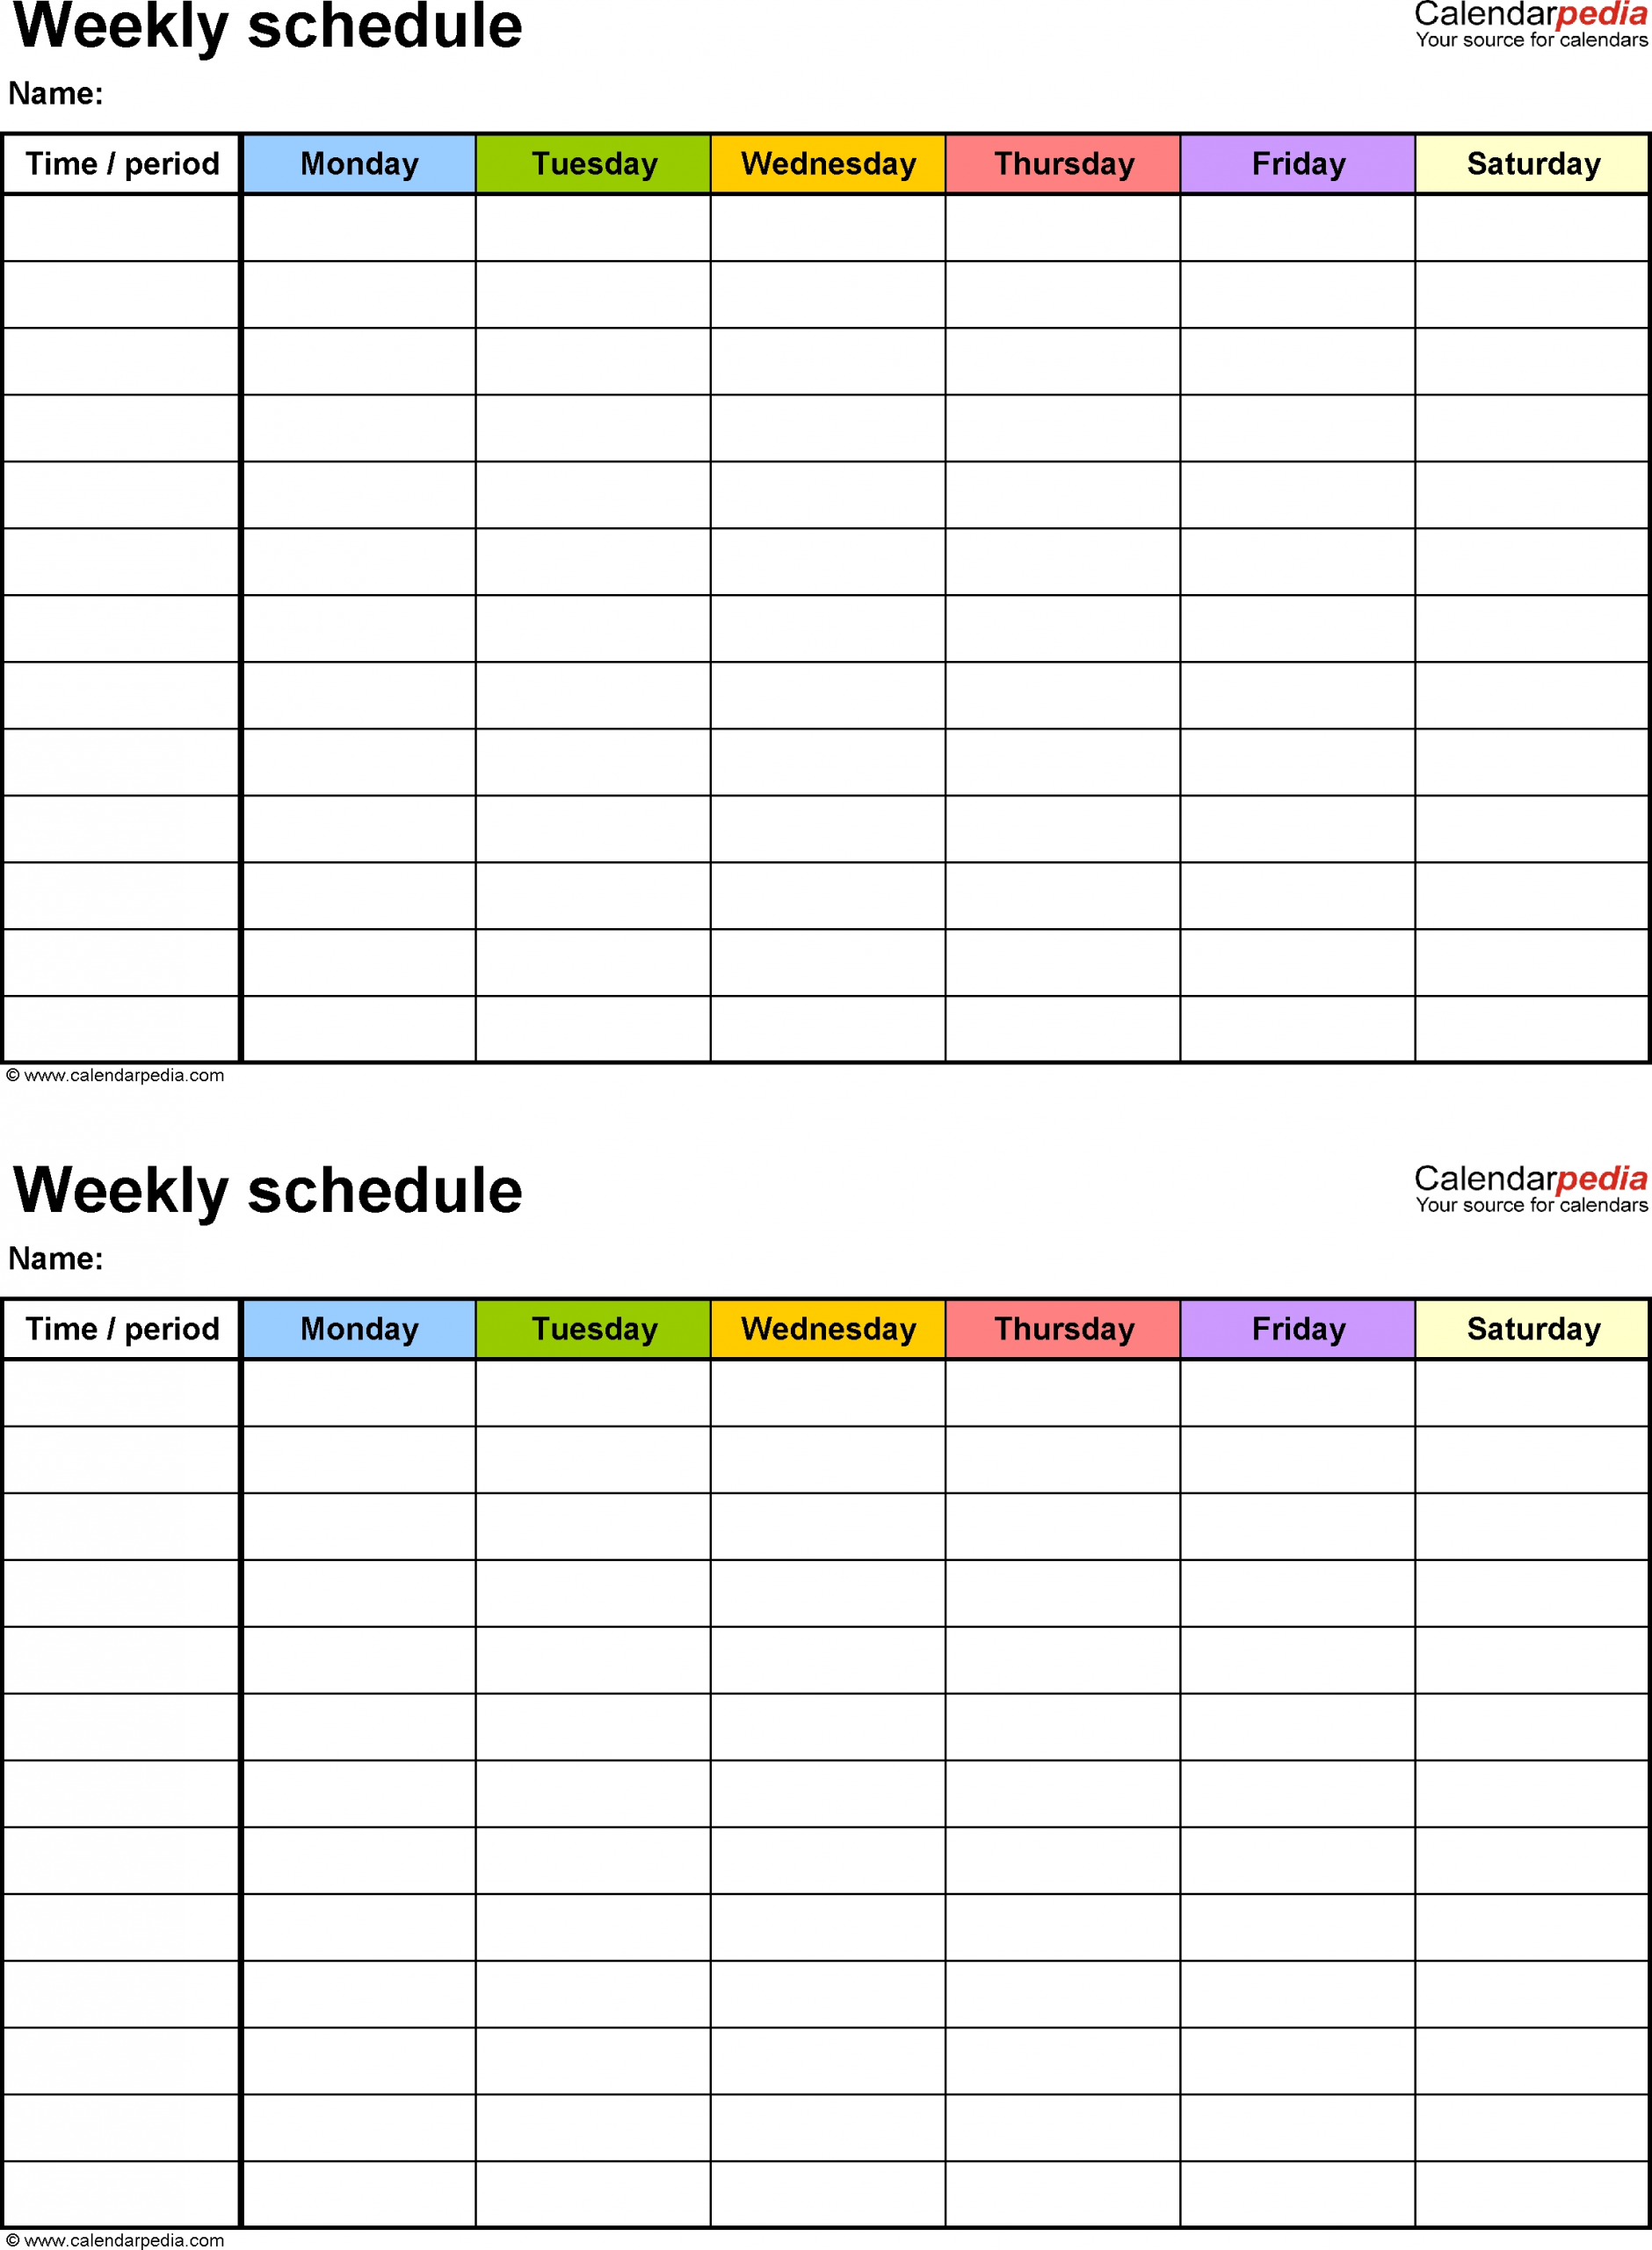 Free Weekly Schedule Templates For Word - 18 Templates 9 Day Calendar Template